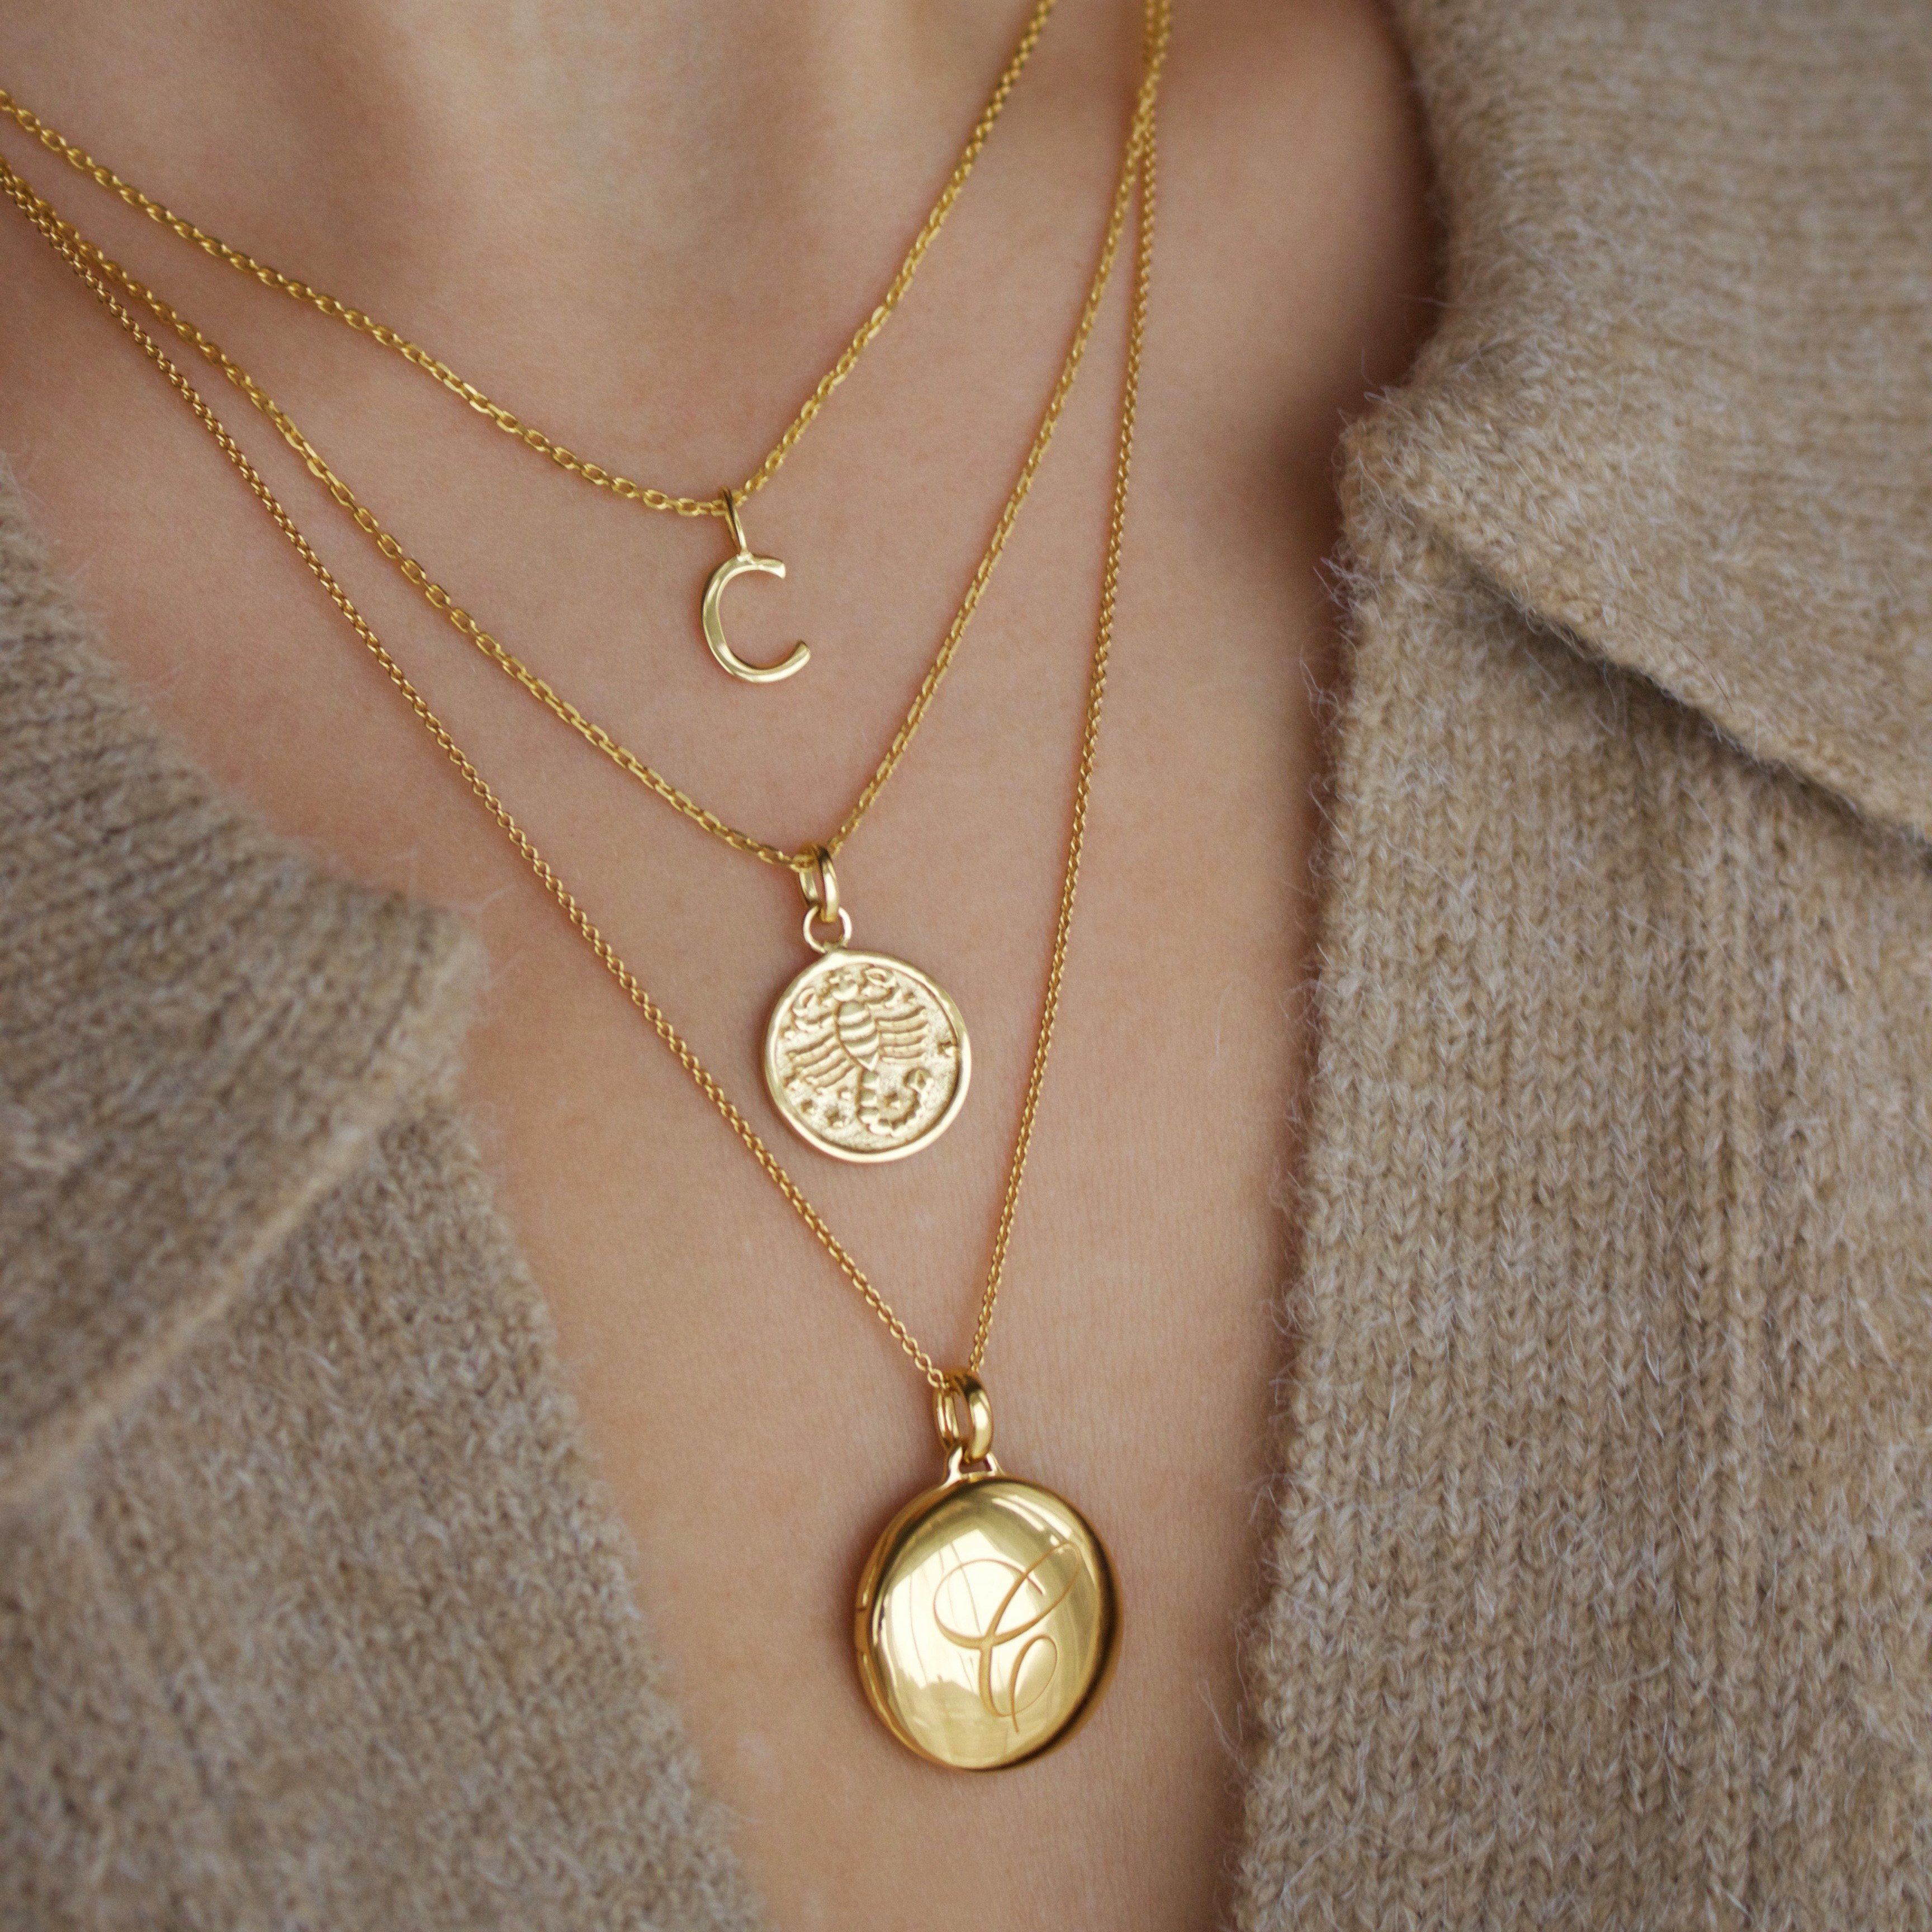 14k Gold Vermeil Engraved Initial Locket Necklace with Diamond Detail Necklace VJI 